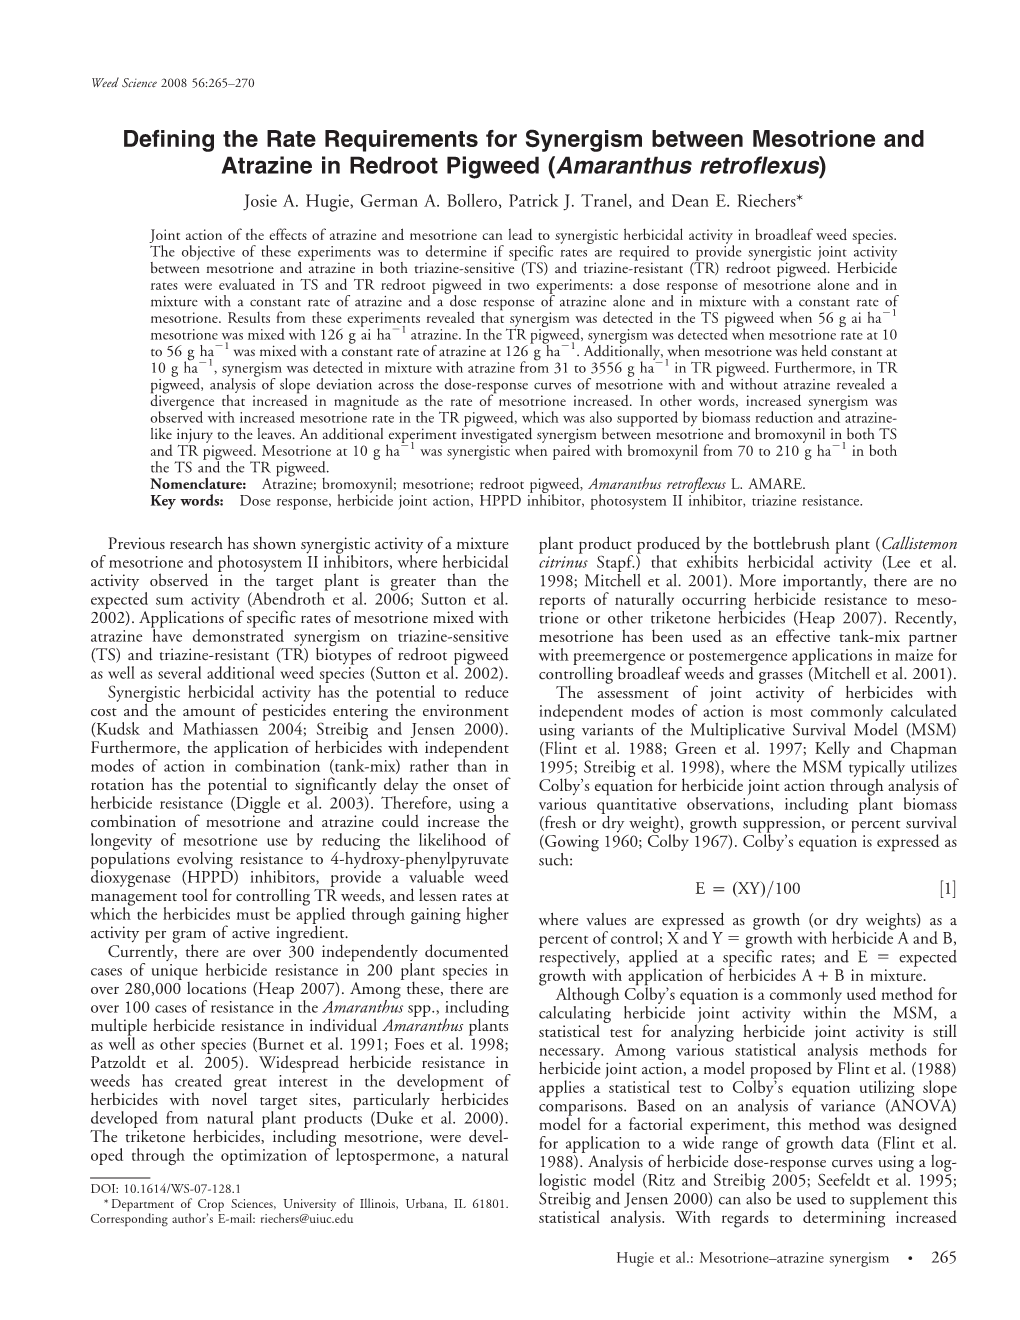 Defining the Rate Requirements for Synergism Between Mesotrione and Atrazine in Redroot Pigweed (Amaranthus Retroflexus) Josie A